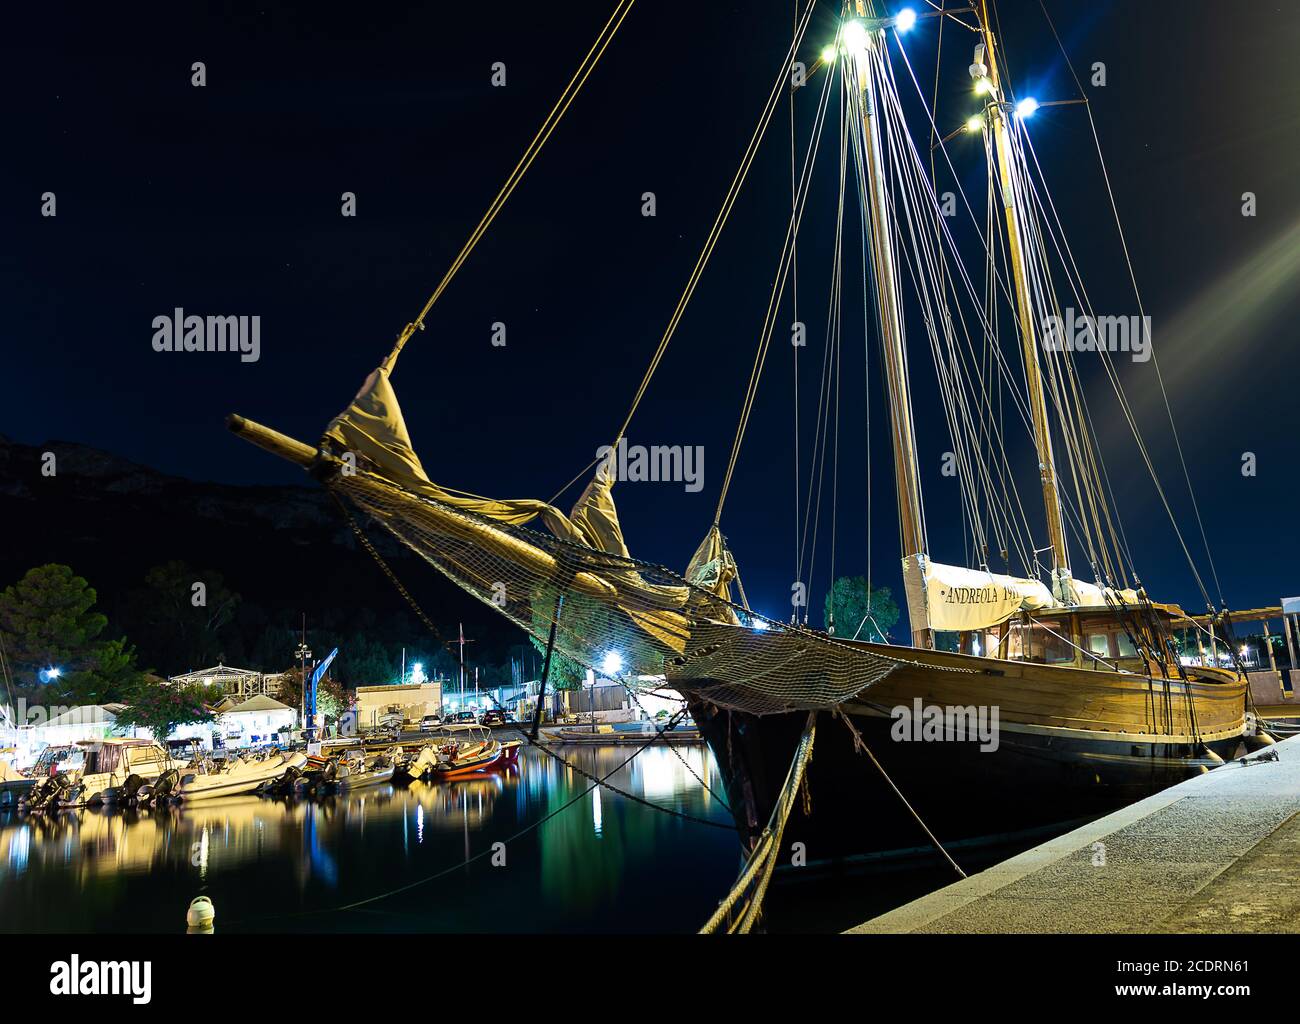 Cagliari, Sardinia, Italy - August 28 2020: vintage old wooden sailing vessel ship moored to city pier on mediterranean sea coast at night Stock Photo